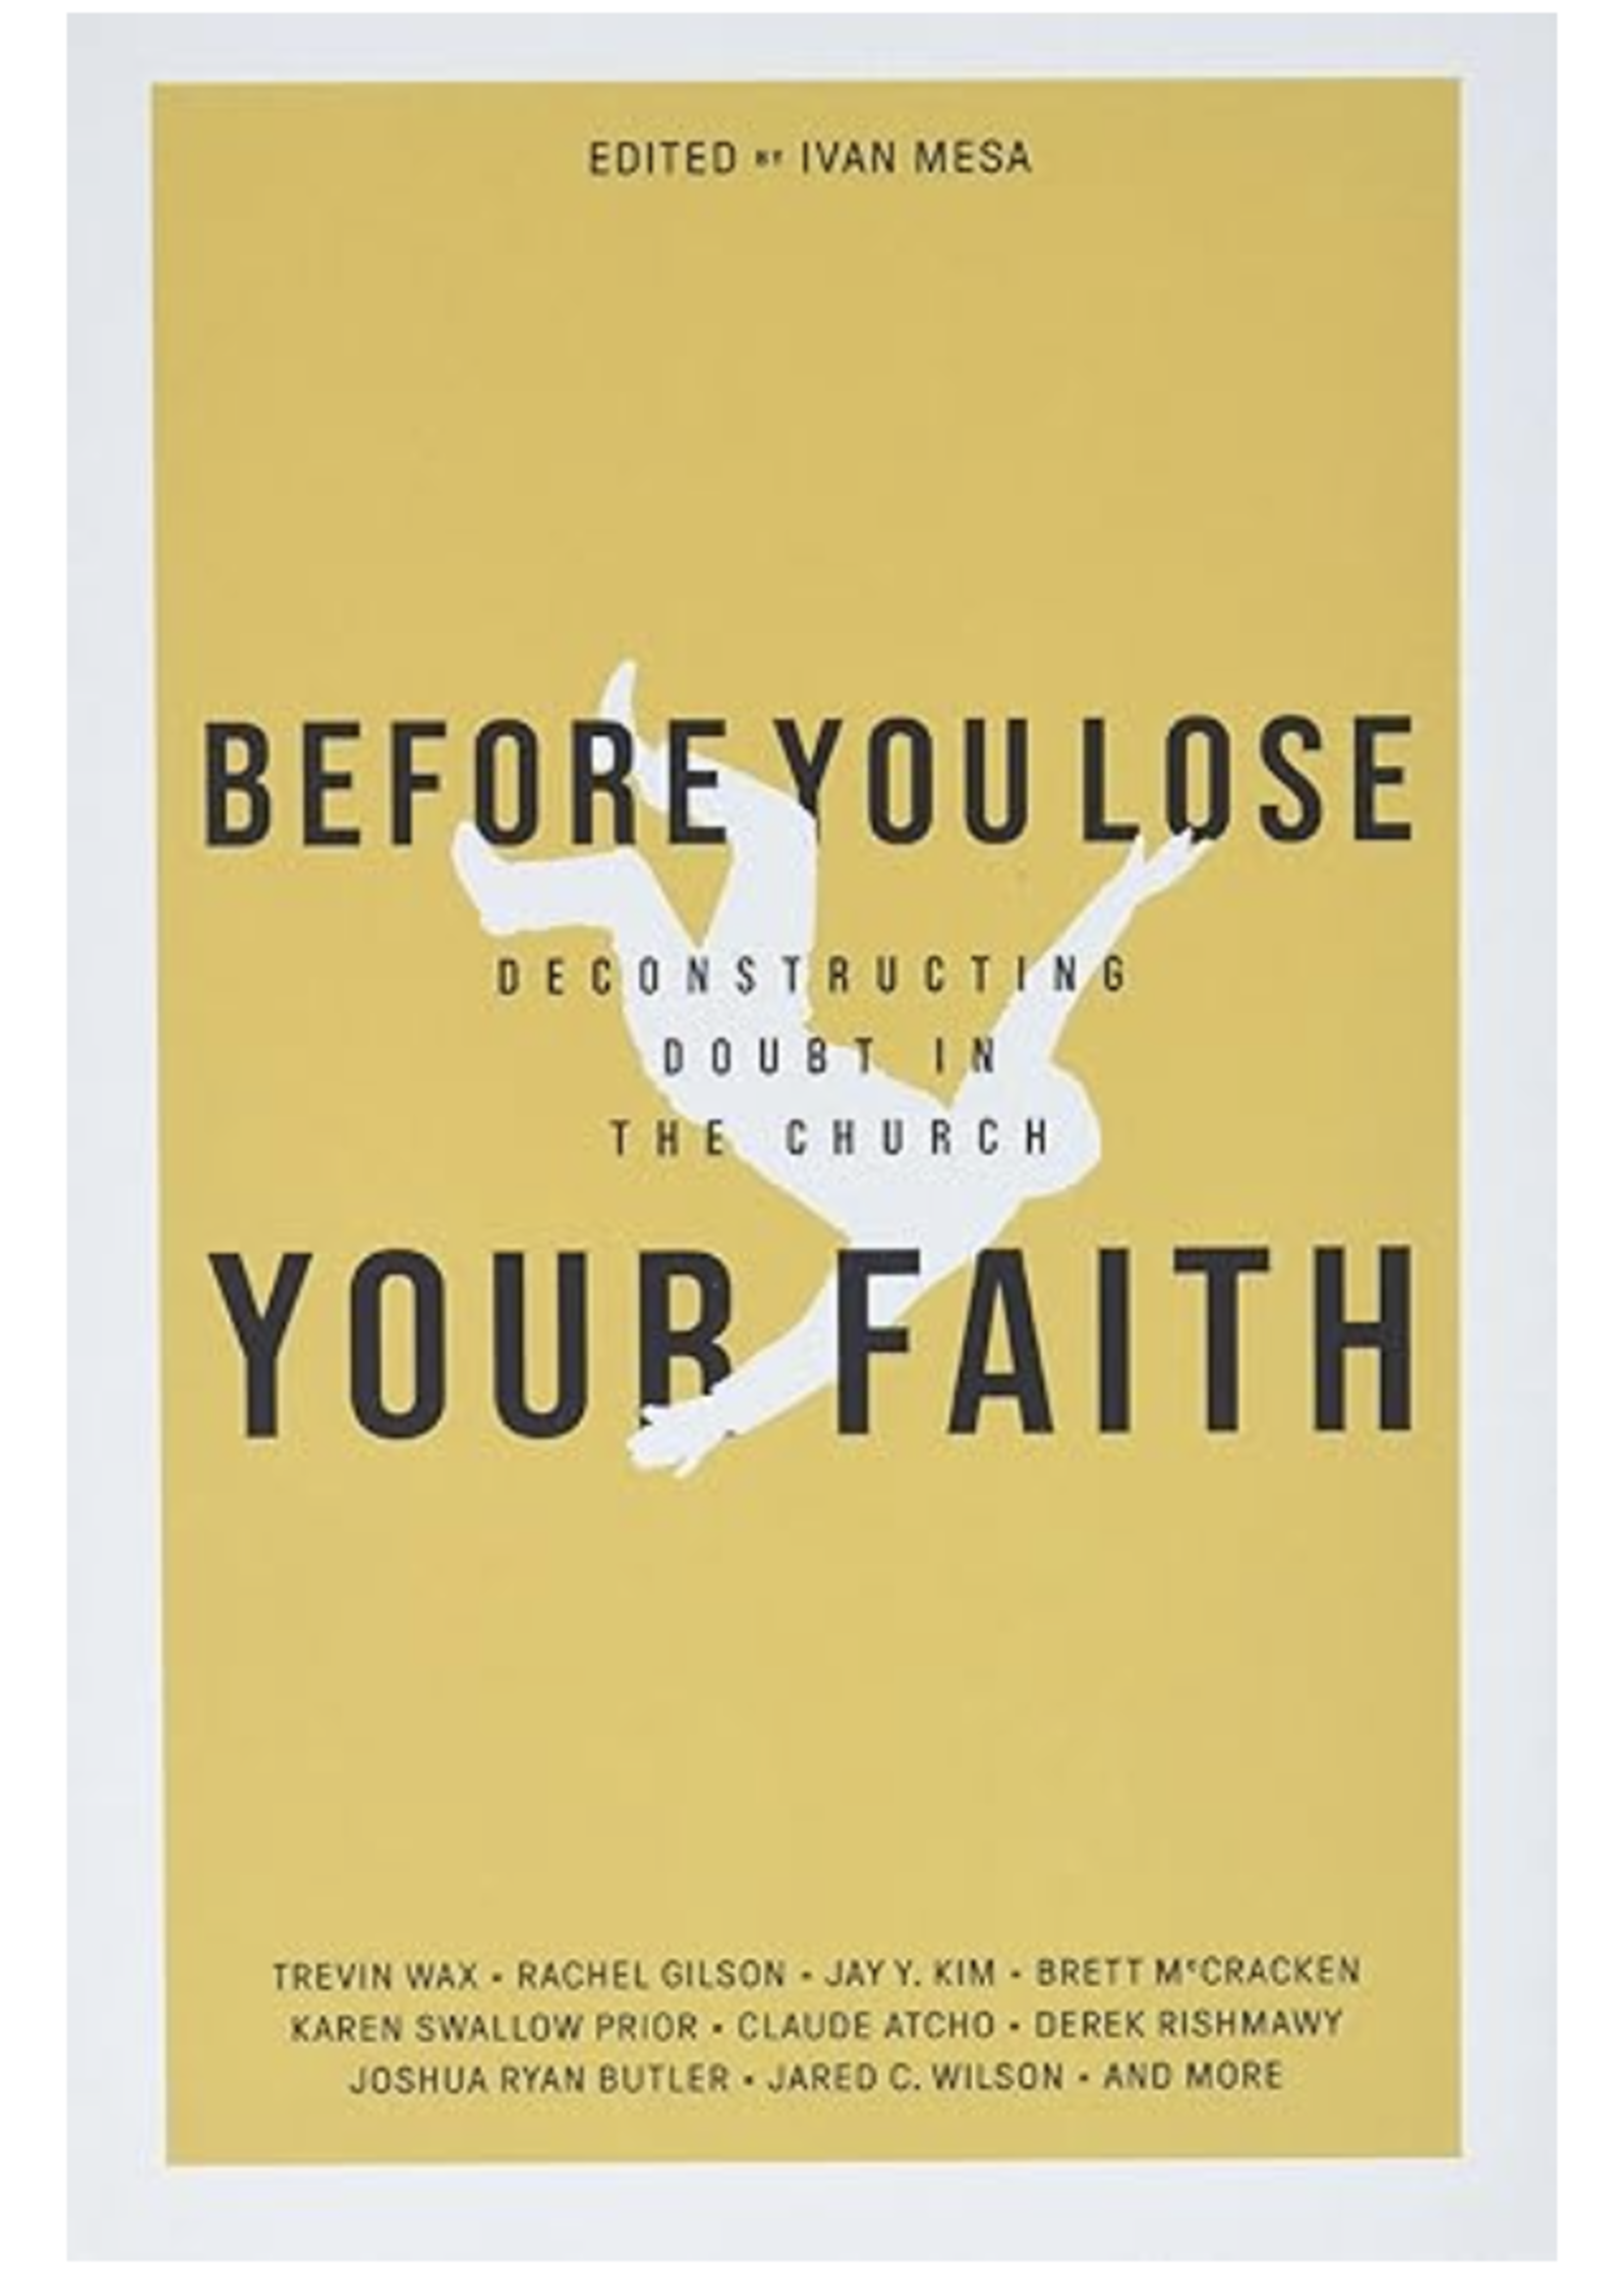 Before You Lose Your Faith: Deconstructing Doubt In The Church [Ivan Mesa]